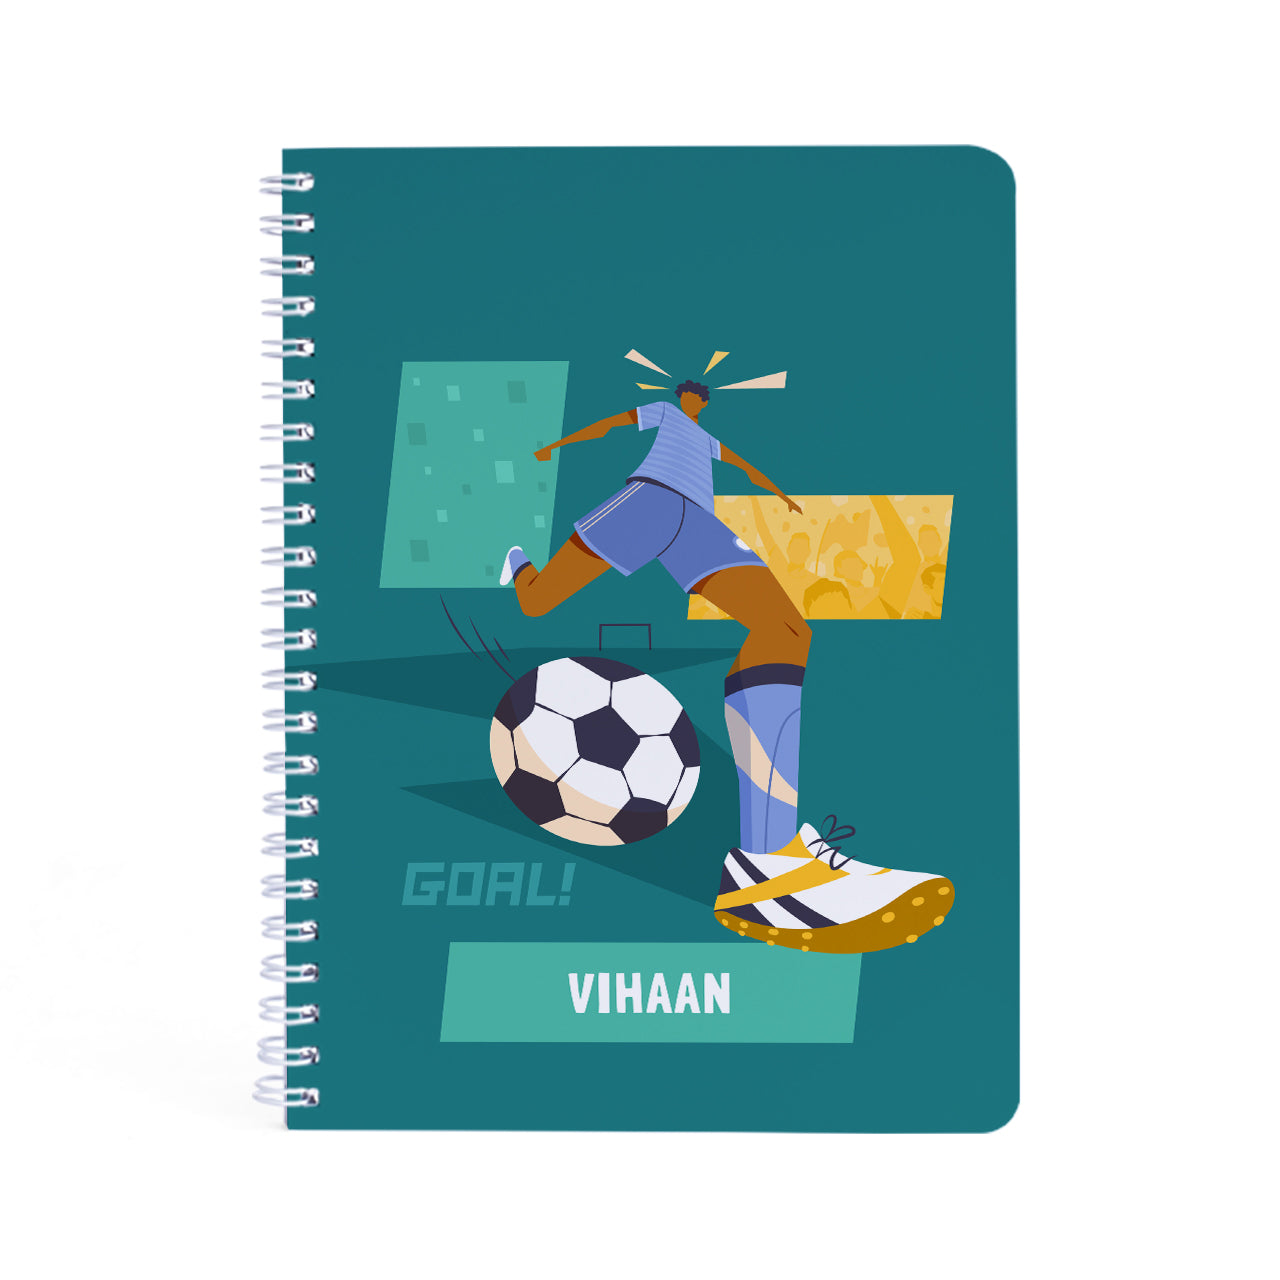 Personalised Spiral Notebook - Football Goals, Boy